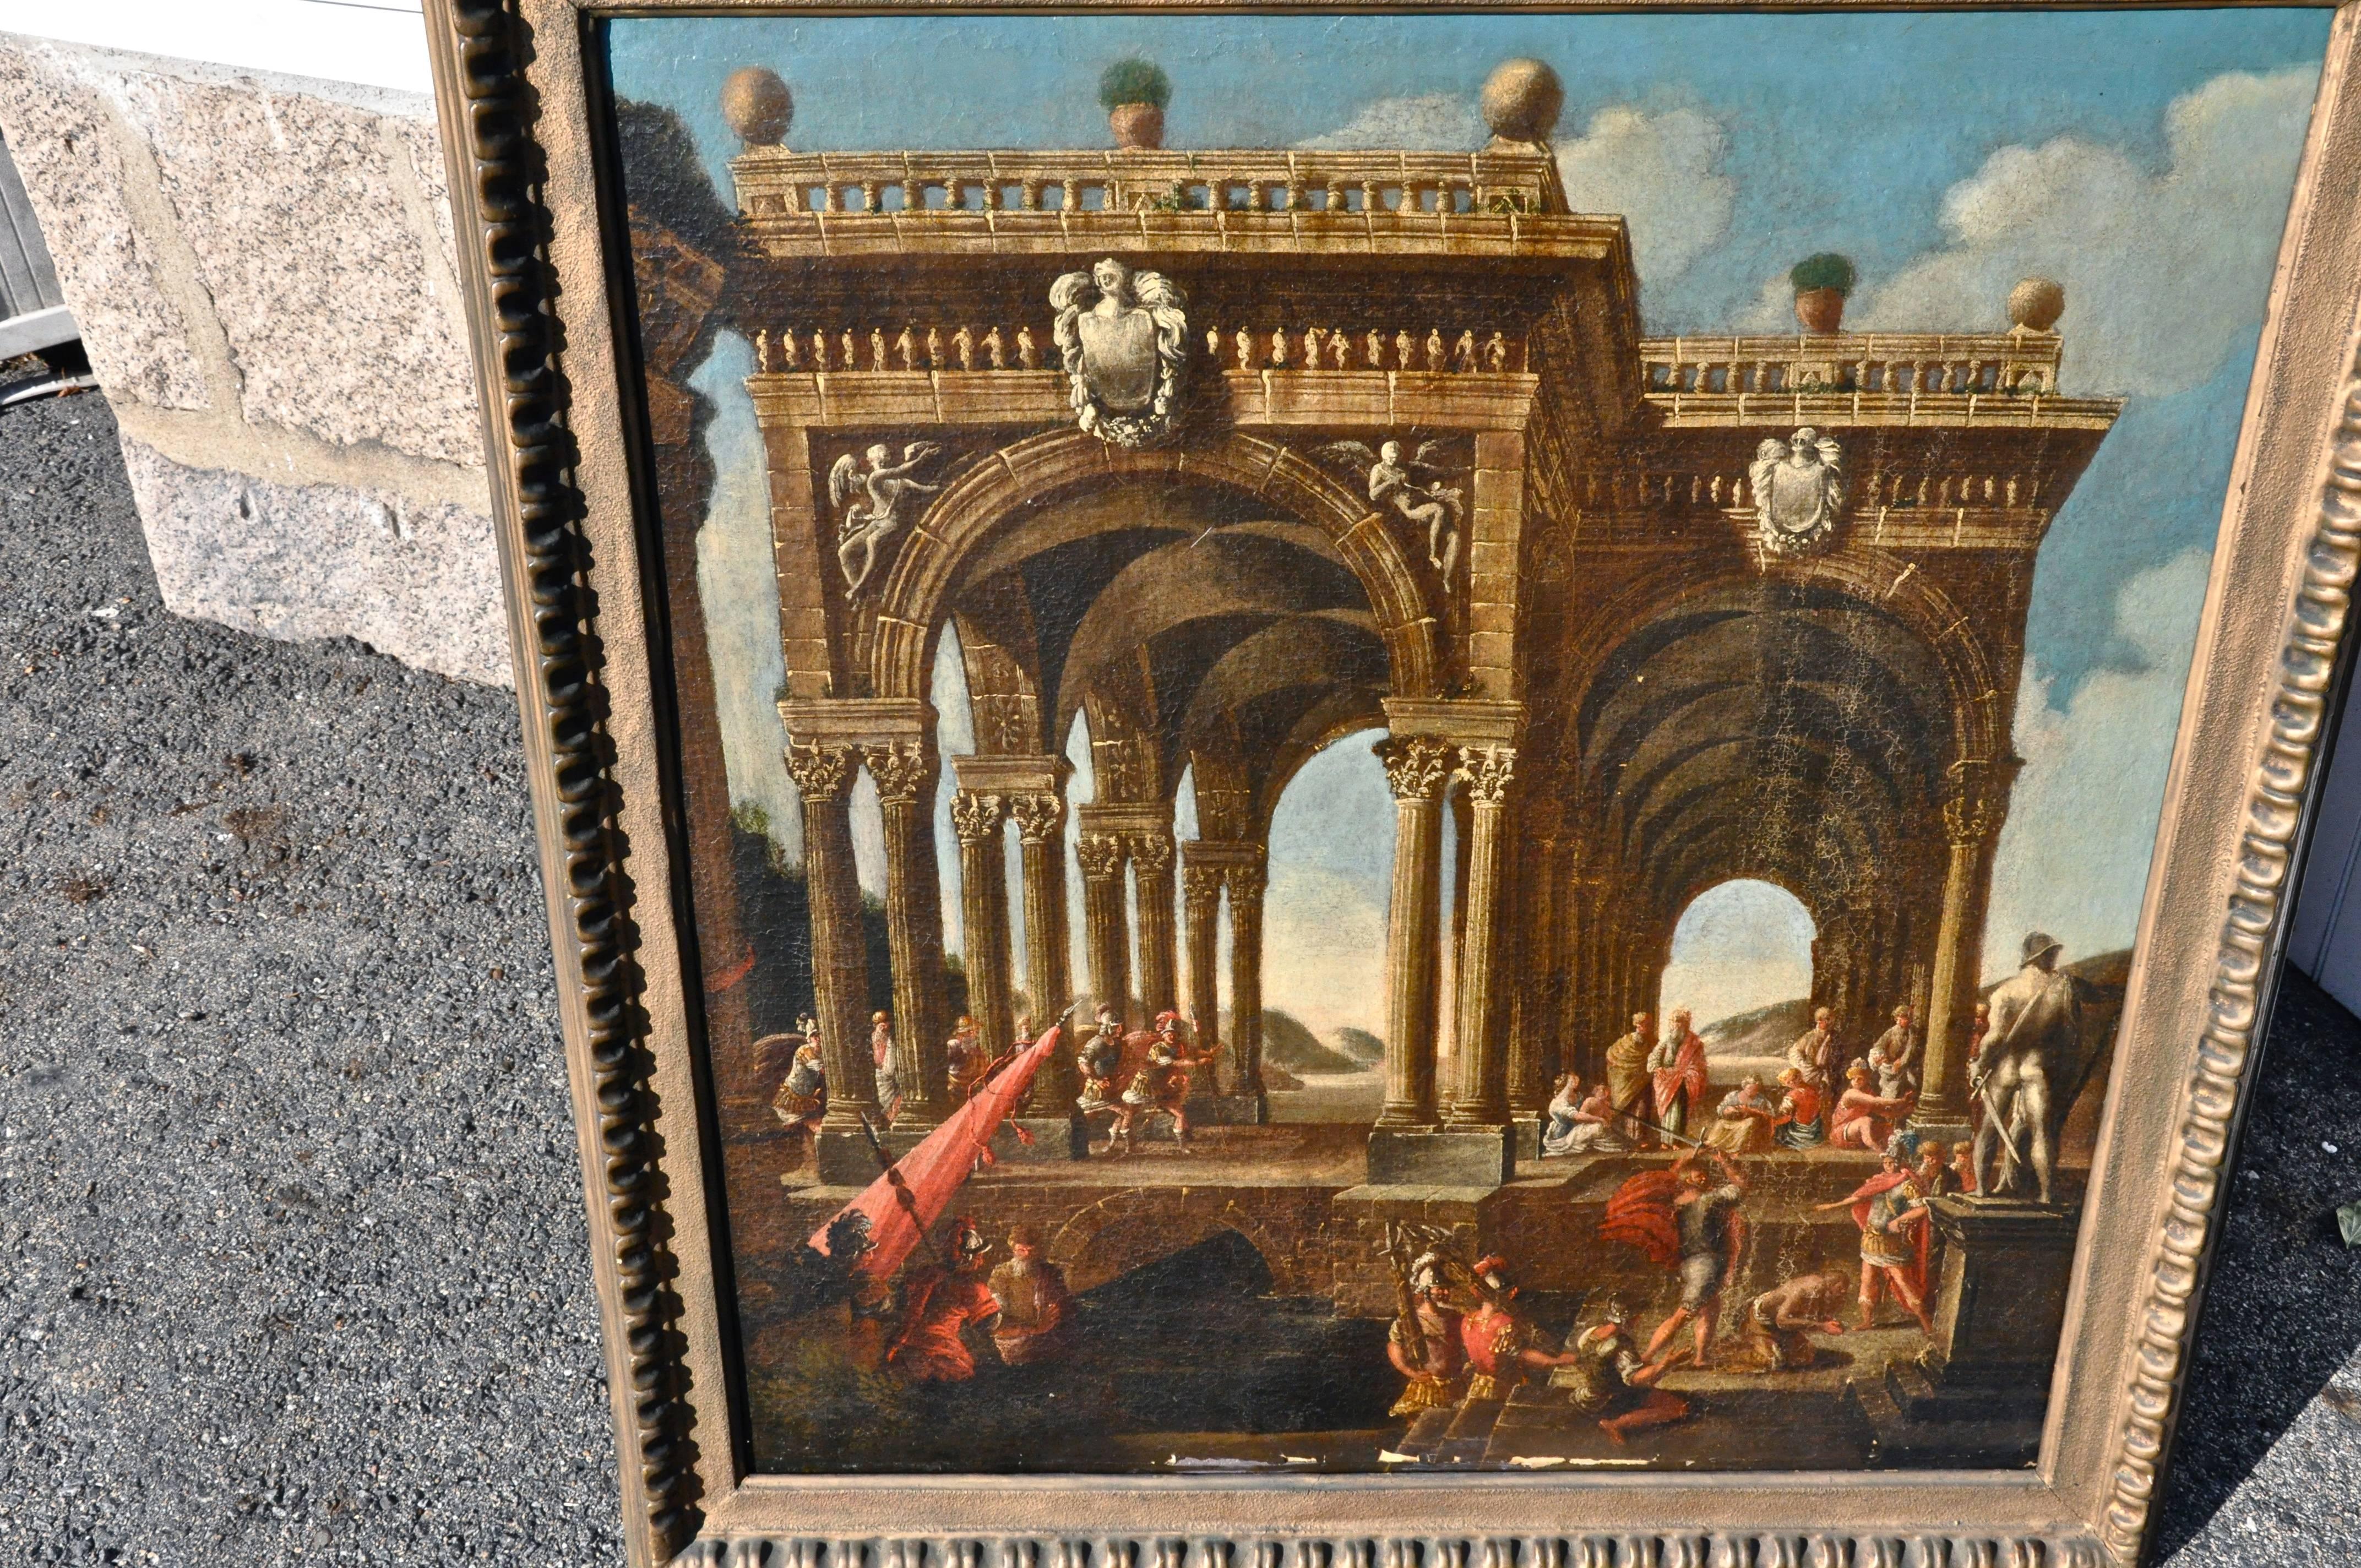 Mid-18th century oil on canvas of figures in Roman architecture.

Capriccio Ruins with vaulted arches.
Roman military figures and classical marble statue in foreground. 
Colors vibrant.
Most certainly of the school of Northern Italian painters